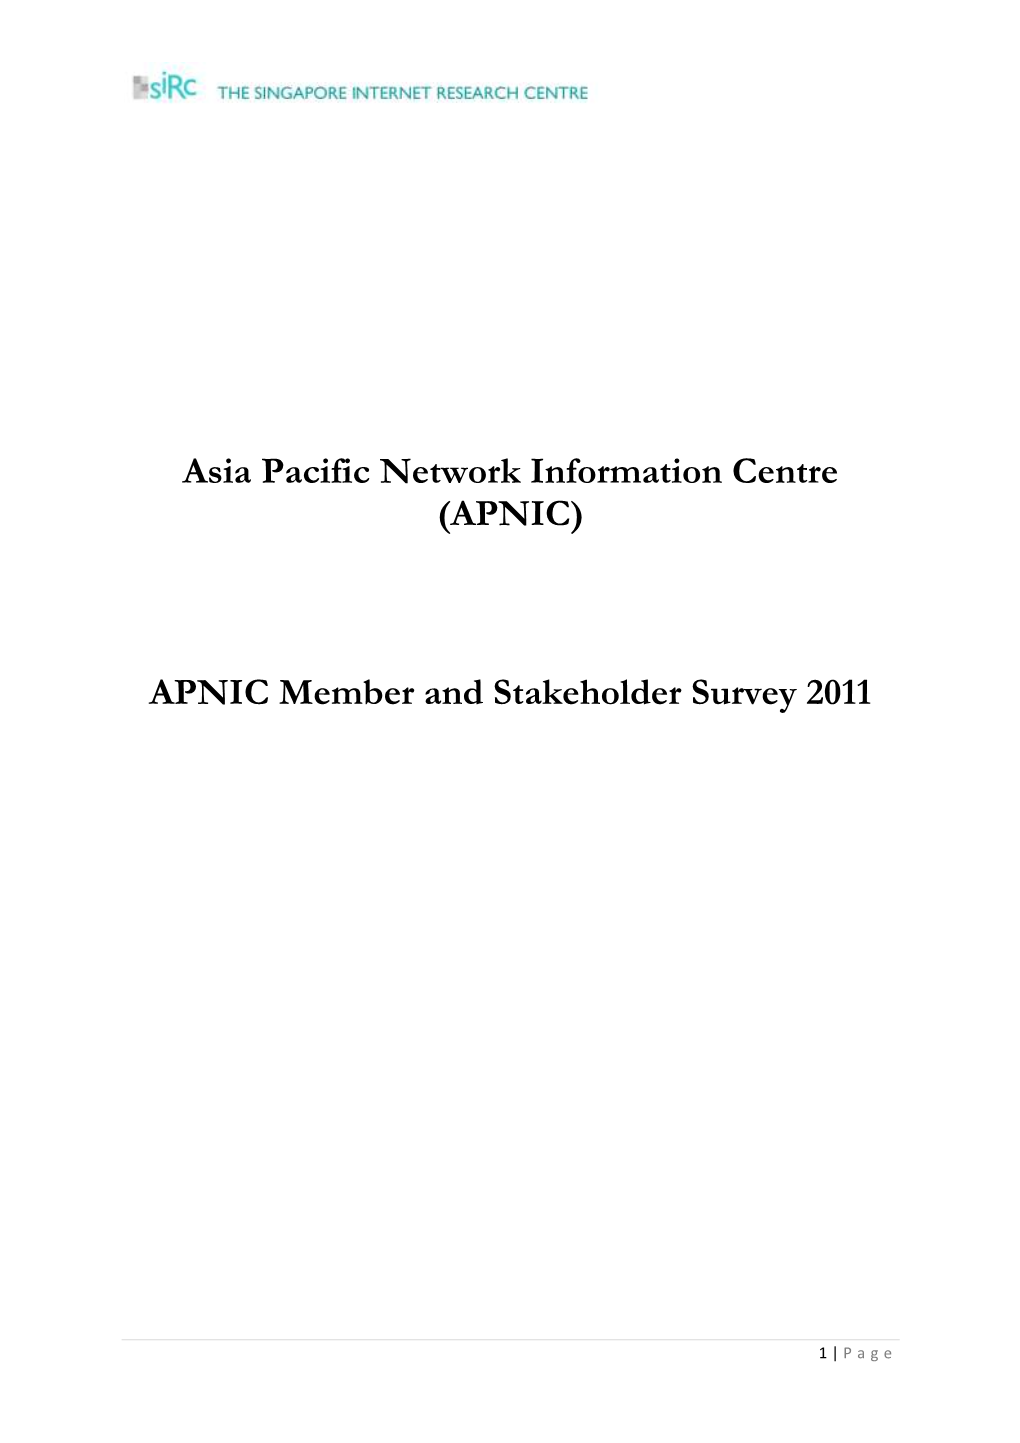 Asia Pacific Network Information Centre (APNIC)